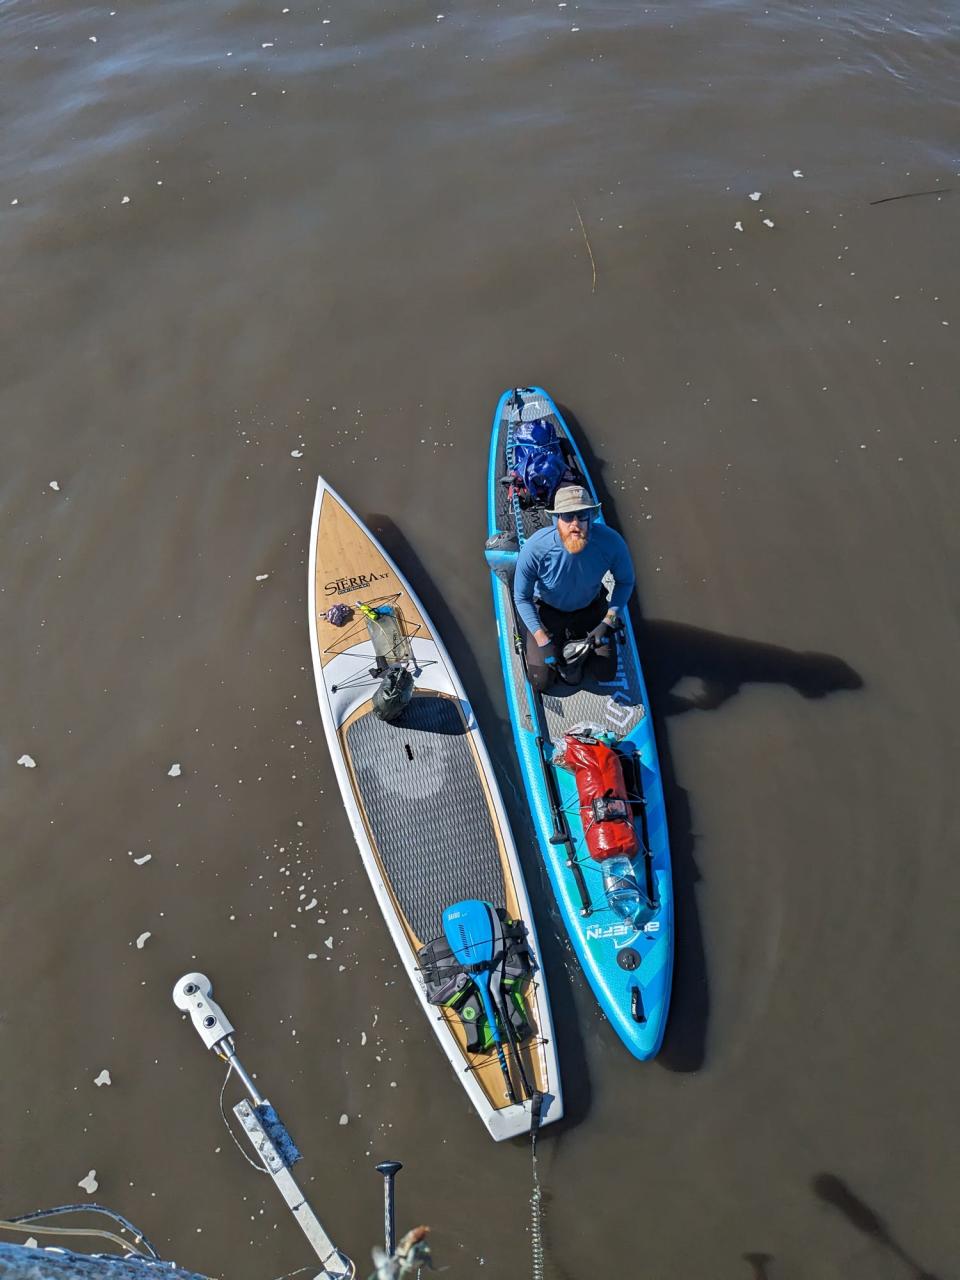 Mason Gravley sits atop his board during a break on Dec. 31 as he and a friend, Jordon Wolfram, crossed Lake Okeechobee on stand-up paddleboards. The pair, both graduates of Southeastern University, have participated for years in endurance ventures by bicycle, kayak, canoe and paddleboard.